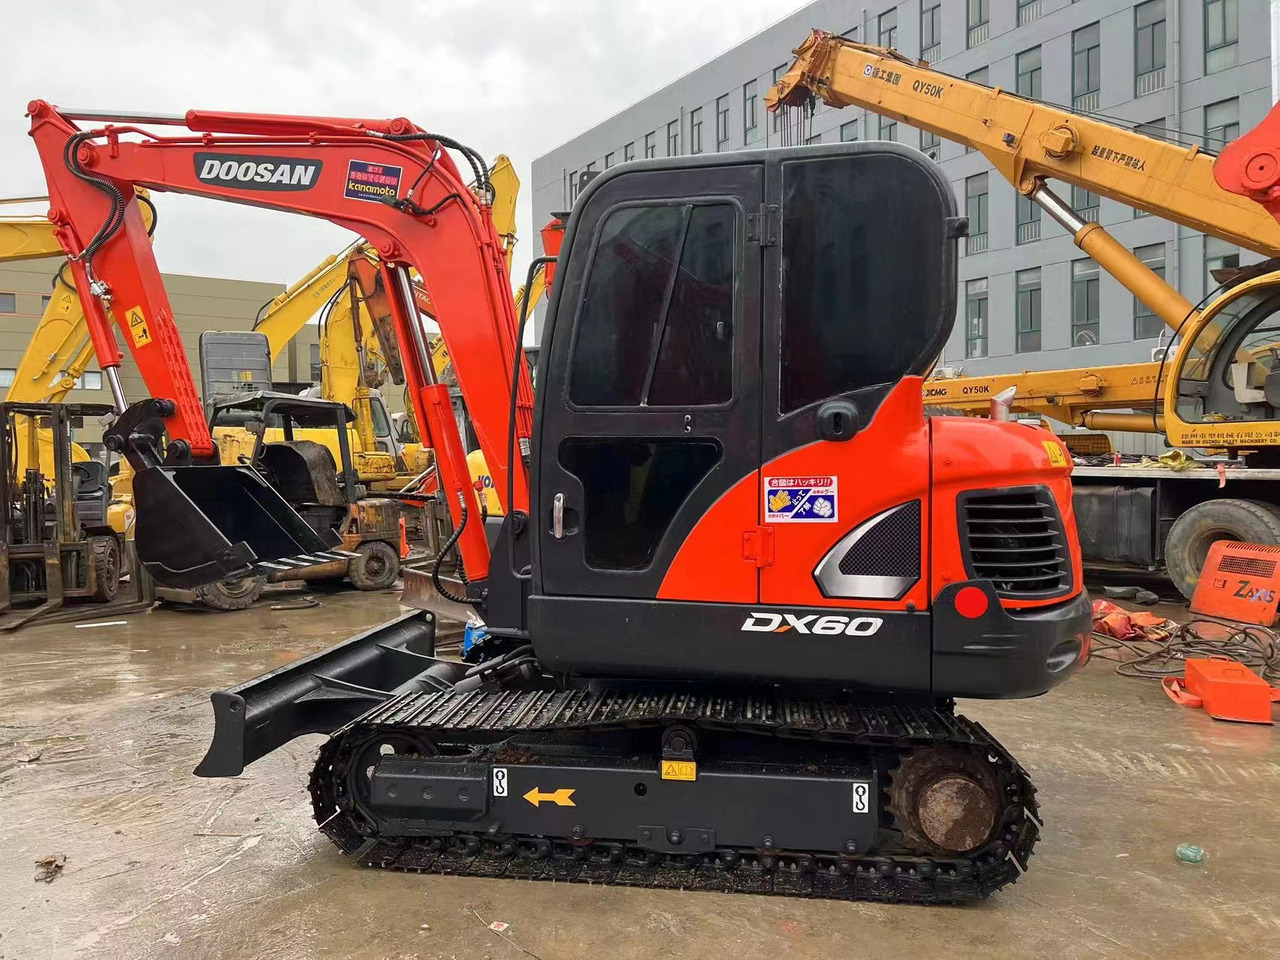 Rupsgraafmachine High quality DOOSAN used excavator DX60 strong power hot selling !!!: afbeelding 4